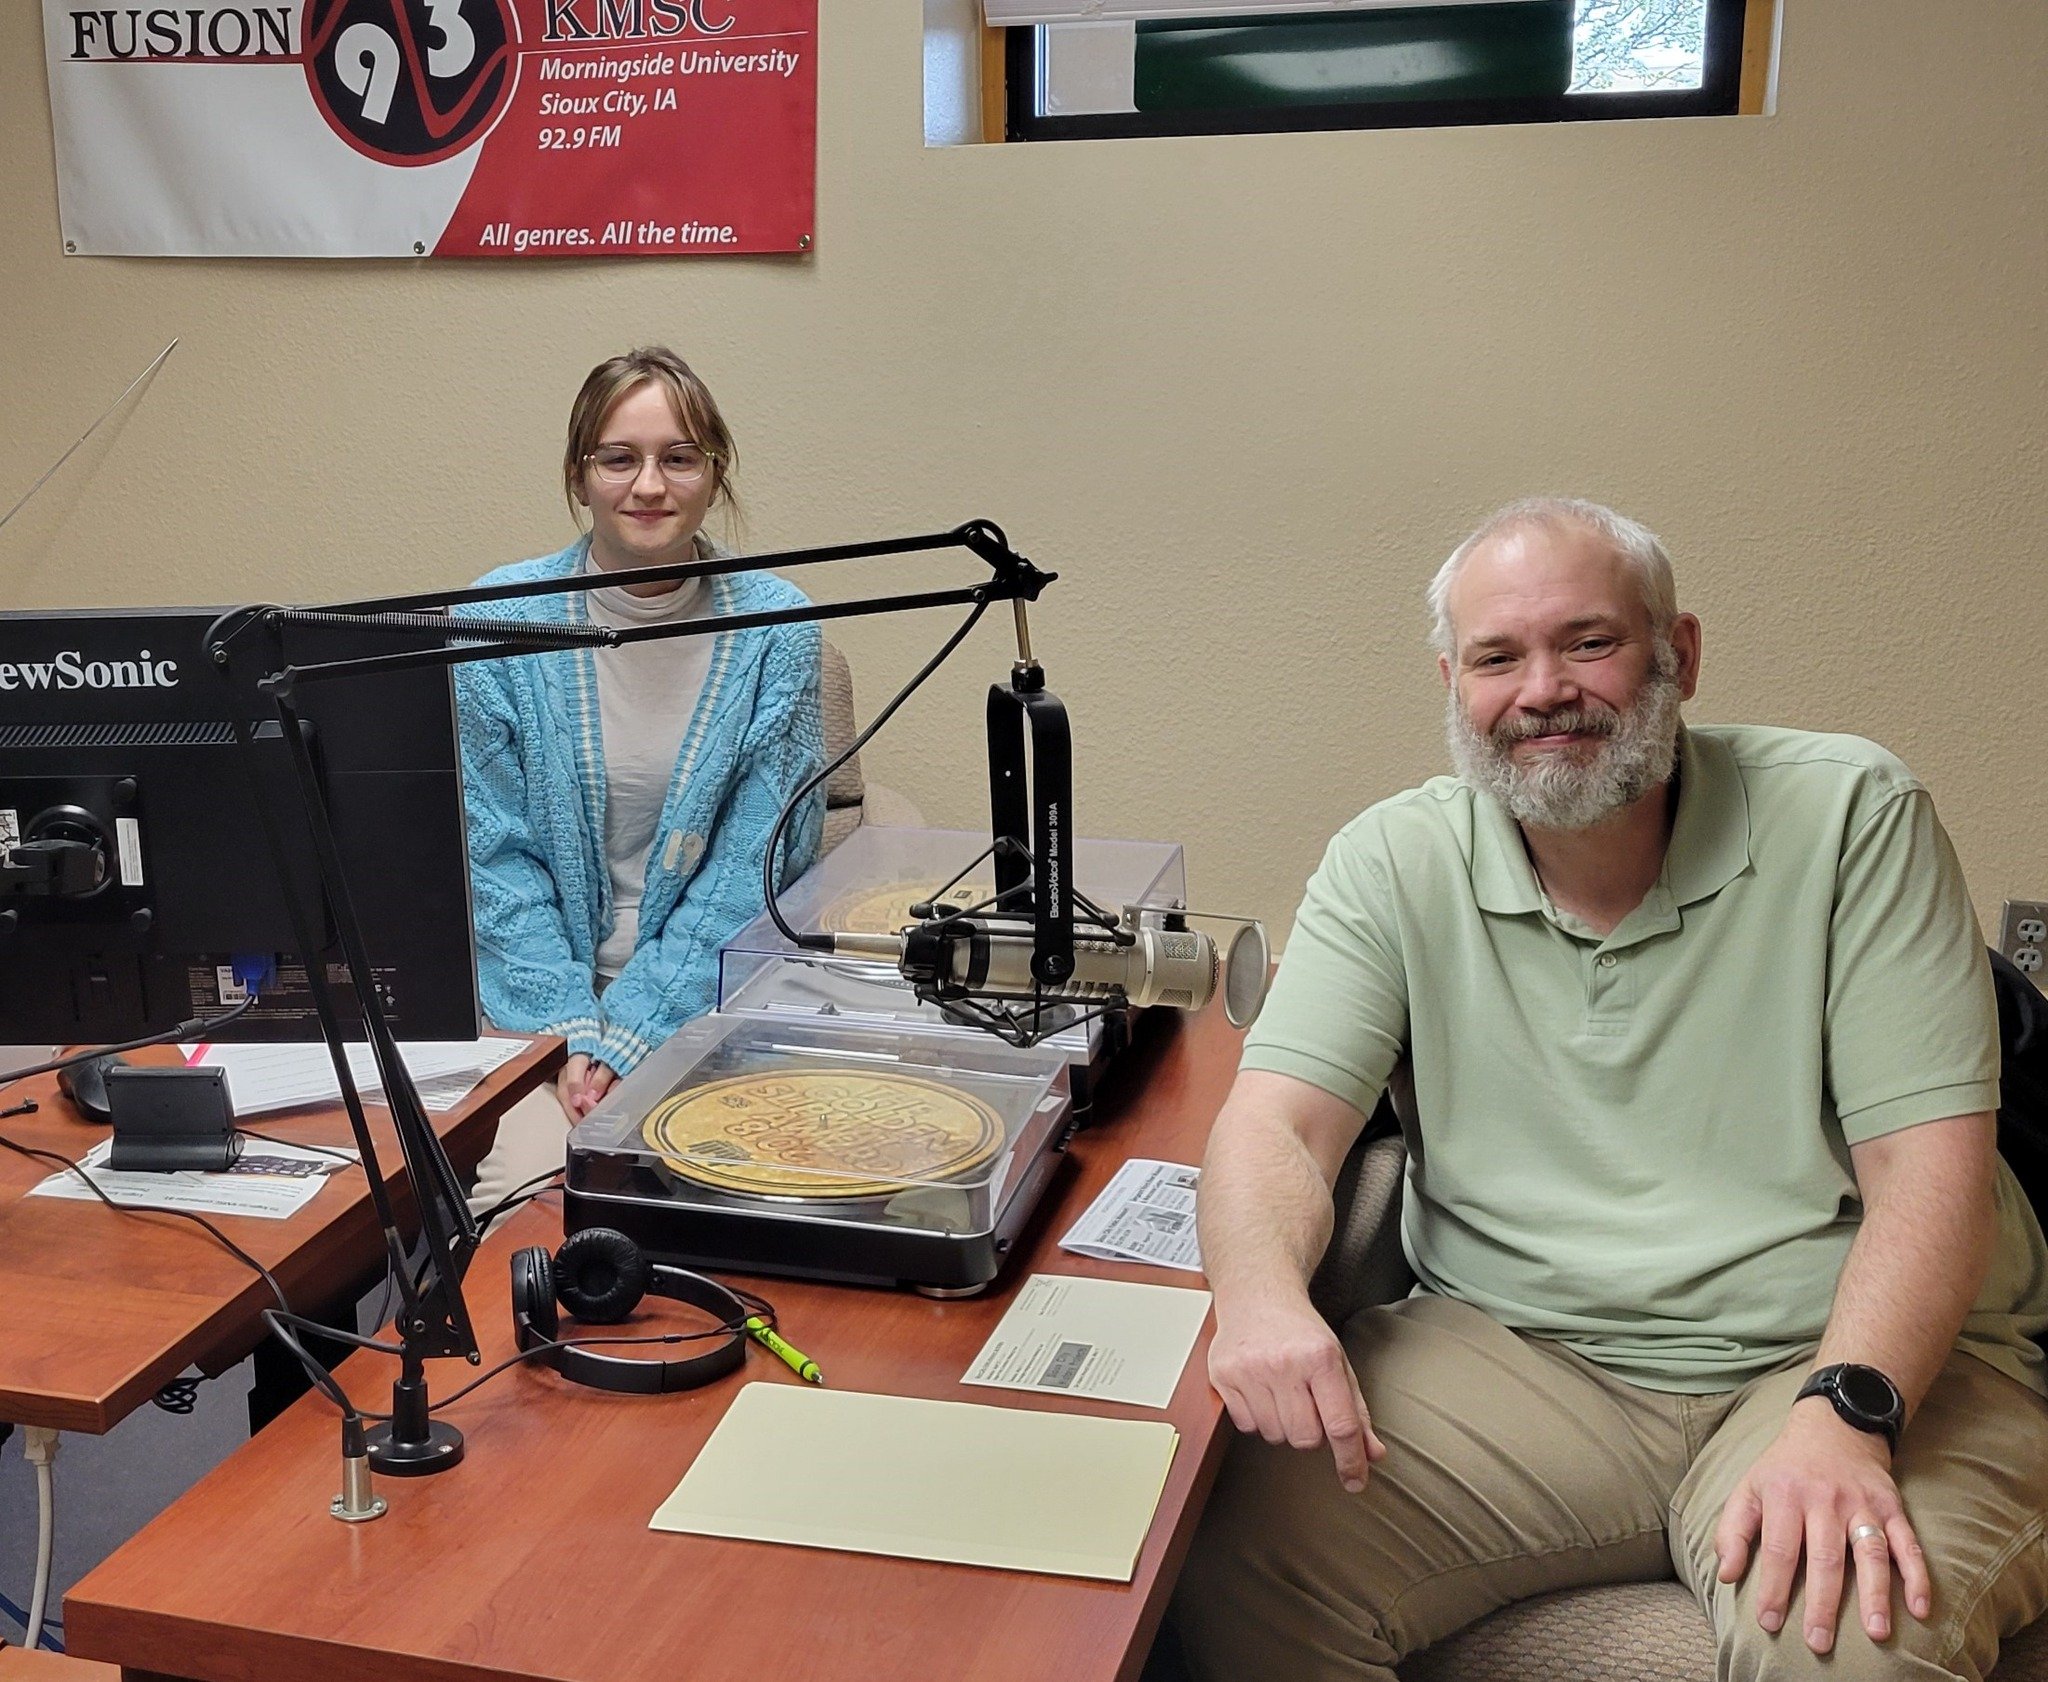 🎙Matt Anderson, Curator of History, was interviewed by Payton Miller, KMSC Station Manager, for KMSC Fusion 93's Community Connections today! Matt discussed upcoming events like Saturday's Logan Park Cemetery Walking Tour and the monthly History at 